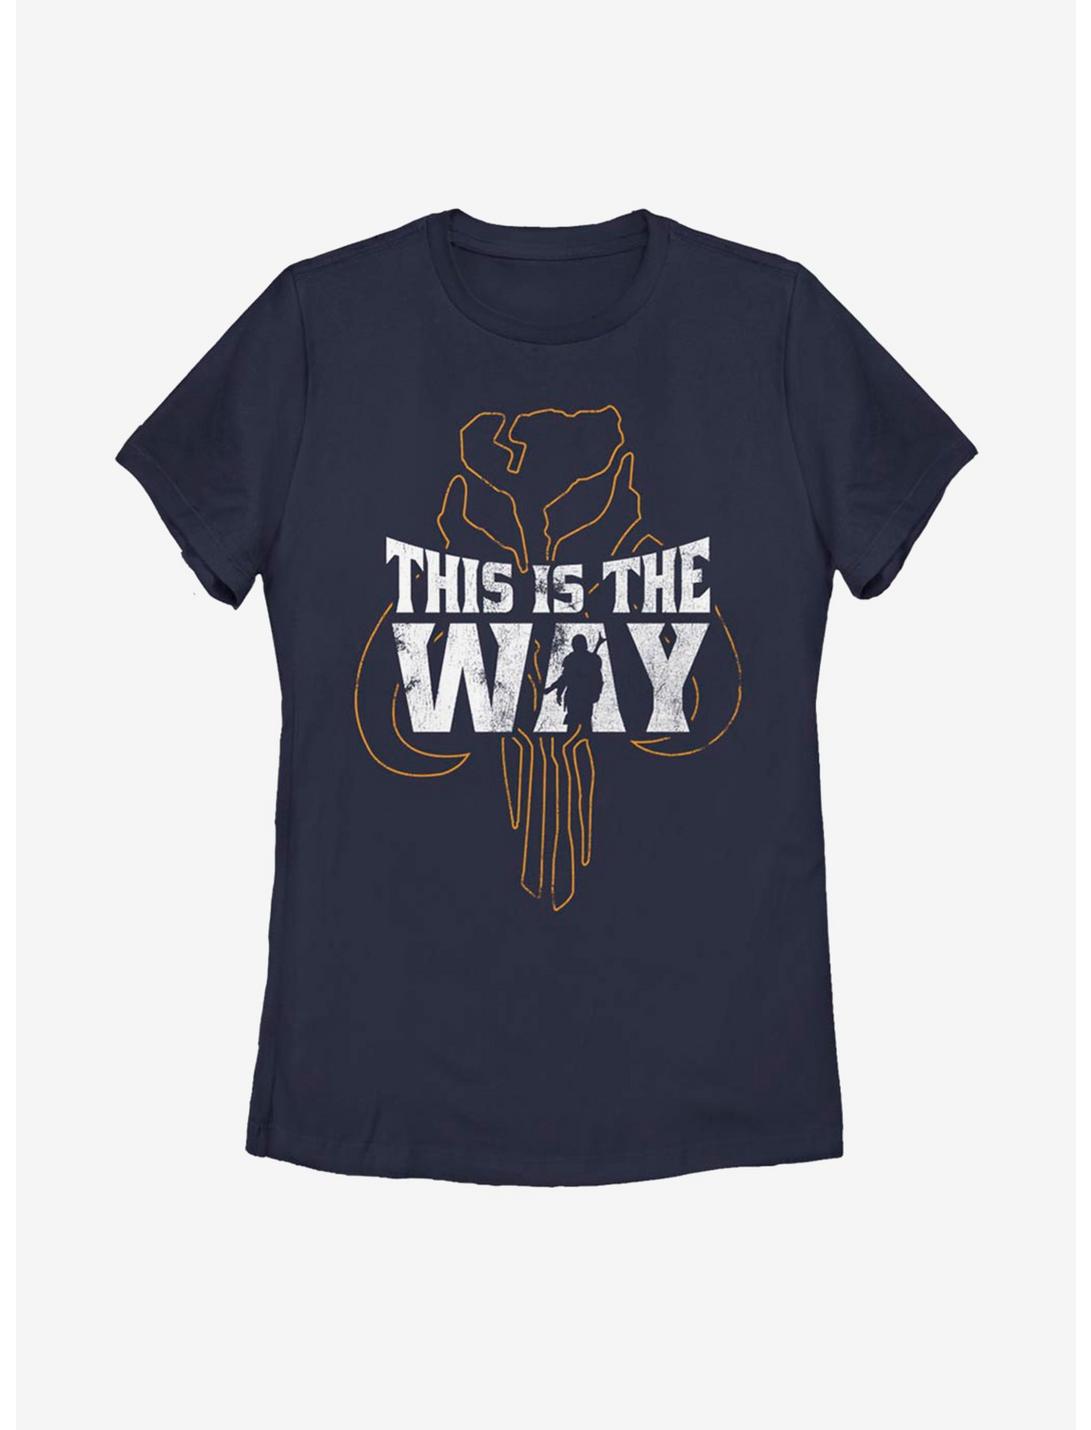 Star Wars The Mandalorian This Is The Way Silhouette Womens T-Shirt, NAVY, hi-res